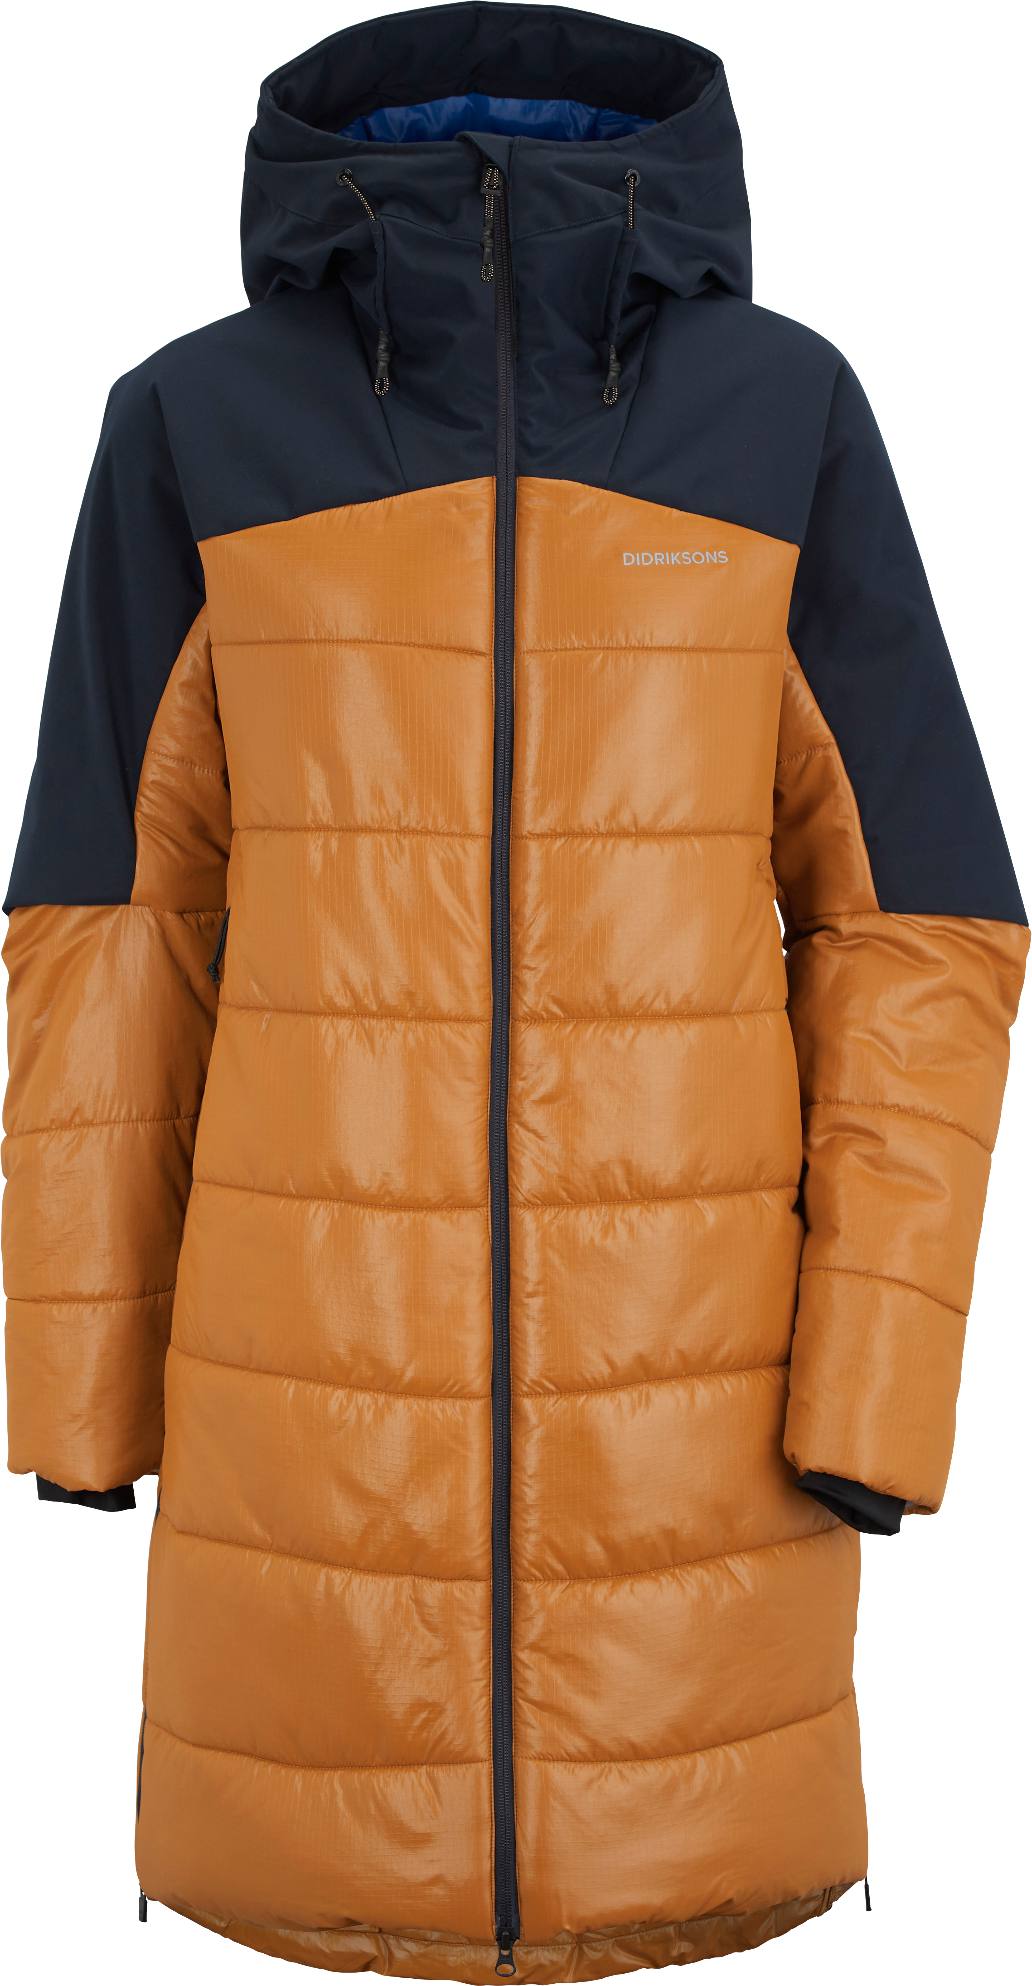 Image of Didriksons Christa Parka